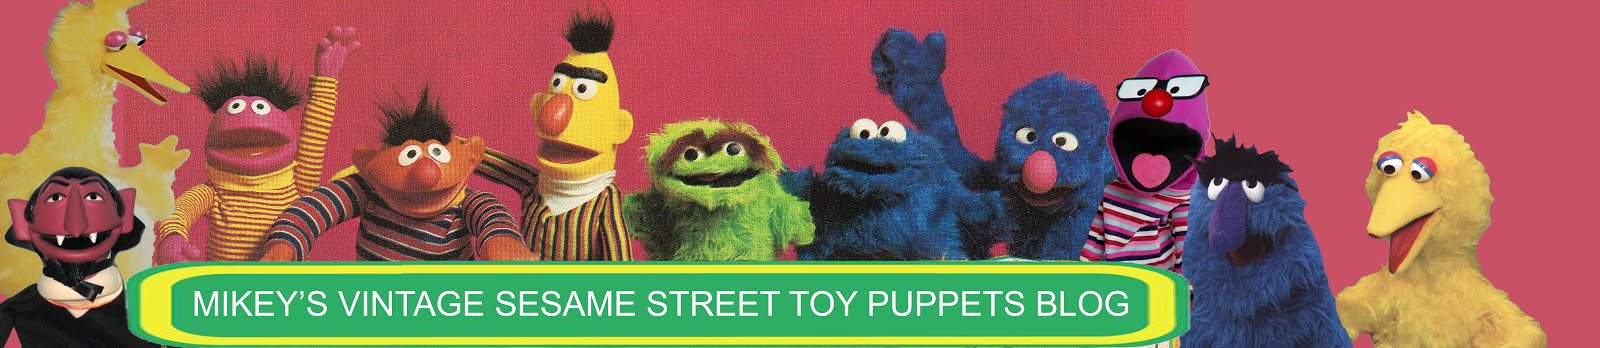 Mikey's Vintage Sesame Street Toy Puppets Blog!